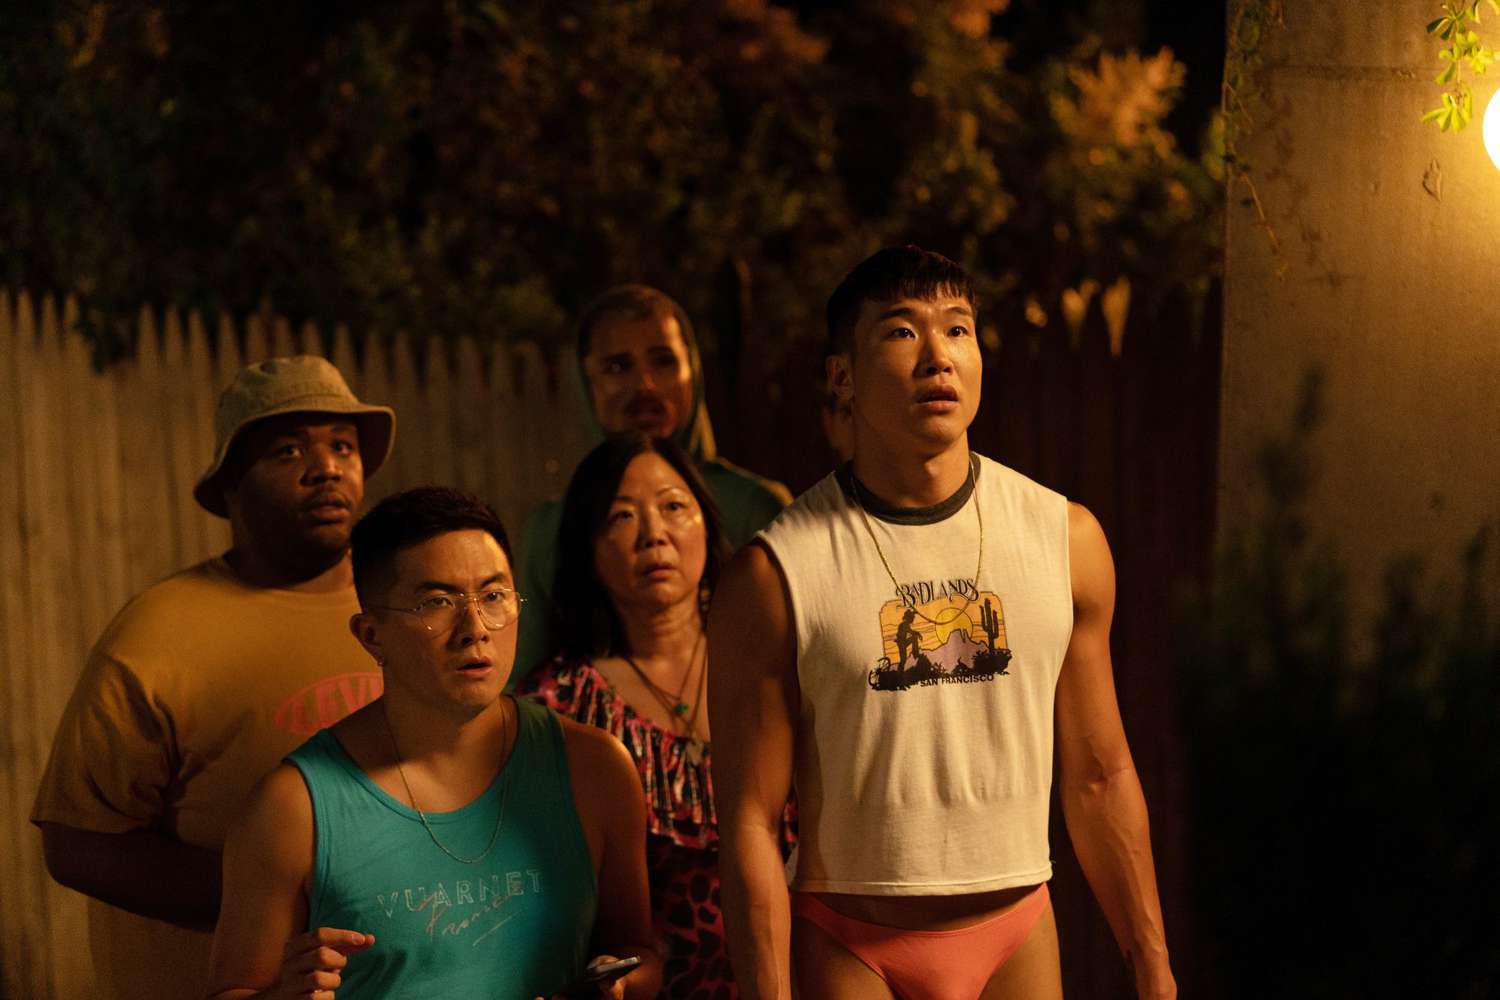 Fire Island movie Searchlight Pictures. (From L-R): Torian Miller, Bowen Yang, Margaret Cho, Tomas Matos and Joel Kim Booster in the film FIRE ISLAND. Photo by Jeong Park. Courtesy of Searchlight Pictures. © 2022 20th Century Studios All Rights Reserved